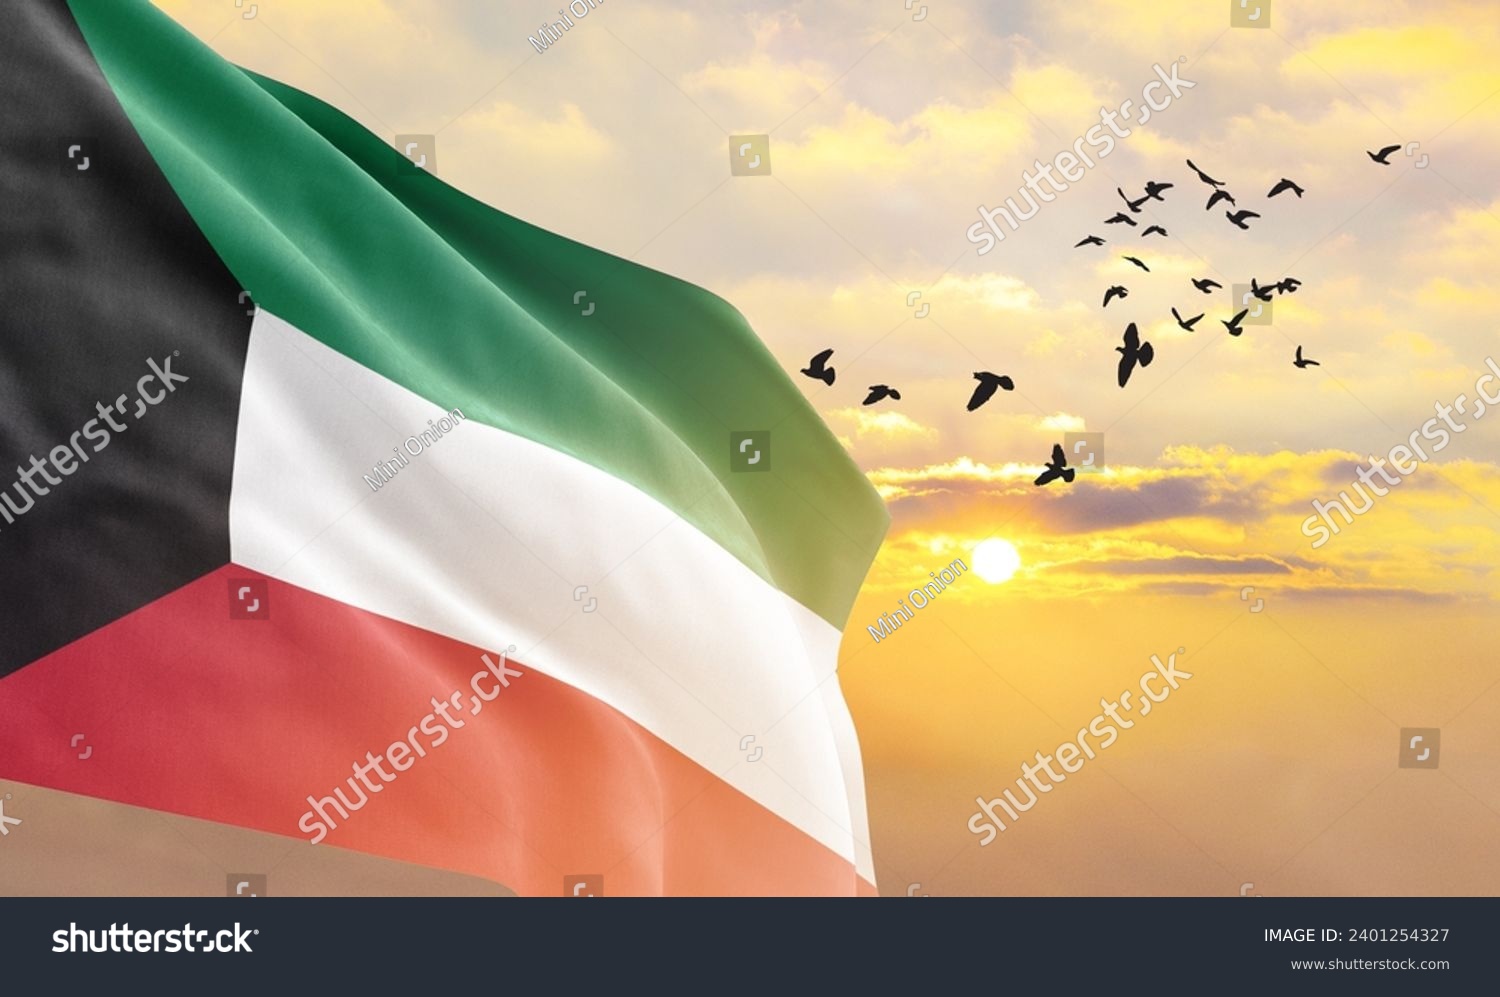 Waving flag of Kuwait against the background of a sunset or sunrise. Kuwait flag for Independence Day. The symbol of the state on wavy fabric. #2401254327